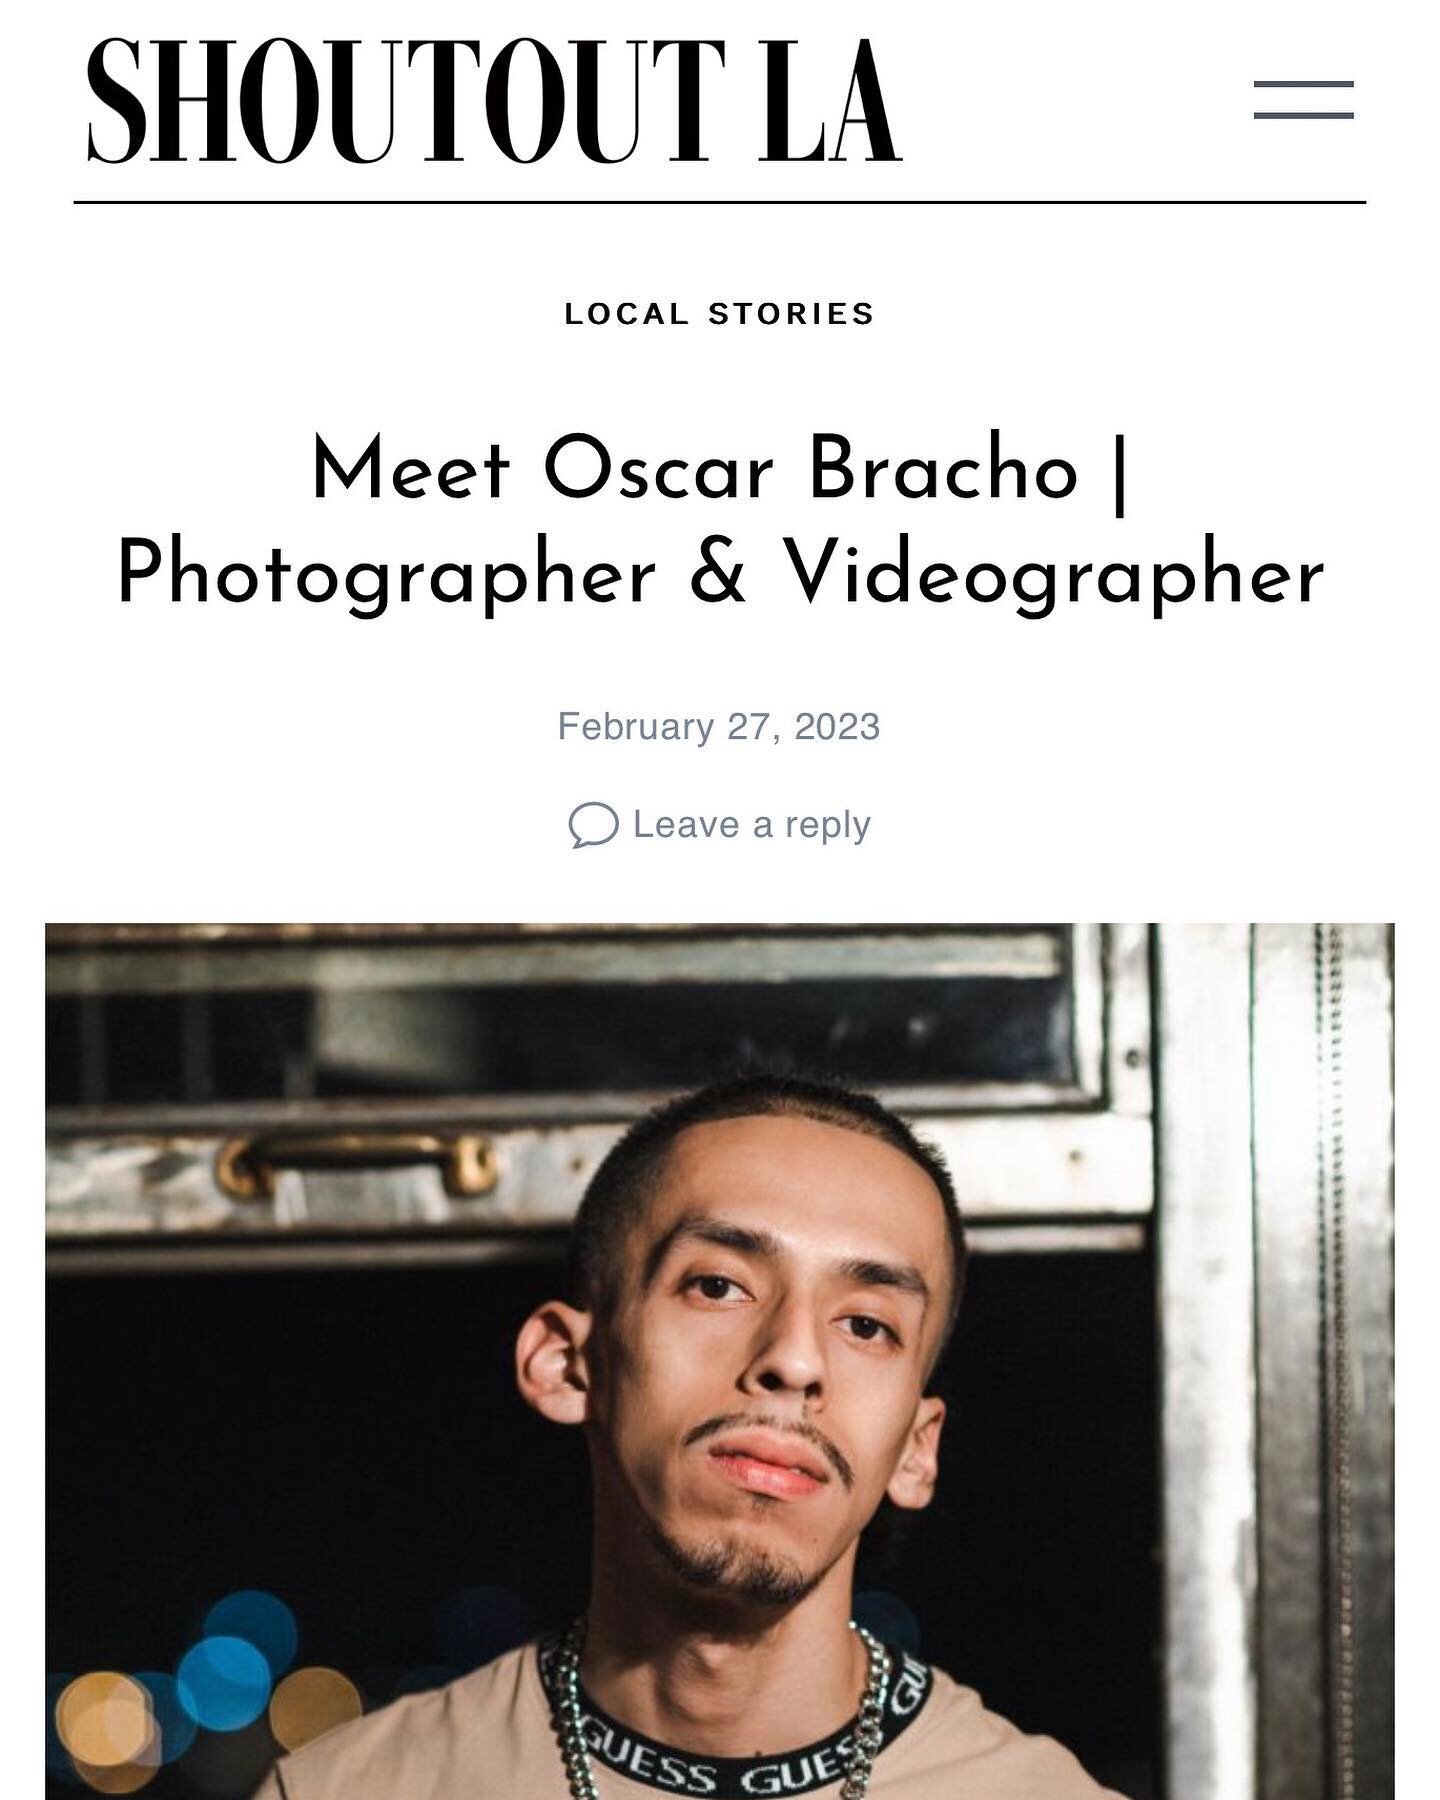 Thank you @shoutoutlaofficial for featuring my story and work in this new article. Bracho Media taking over this year.